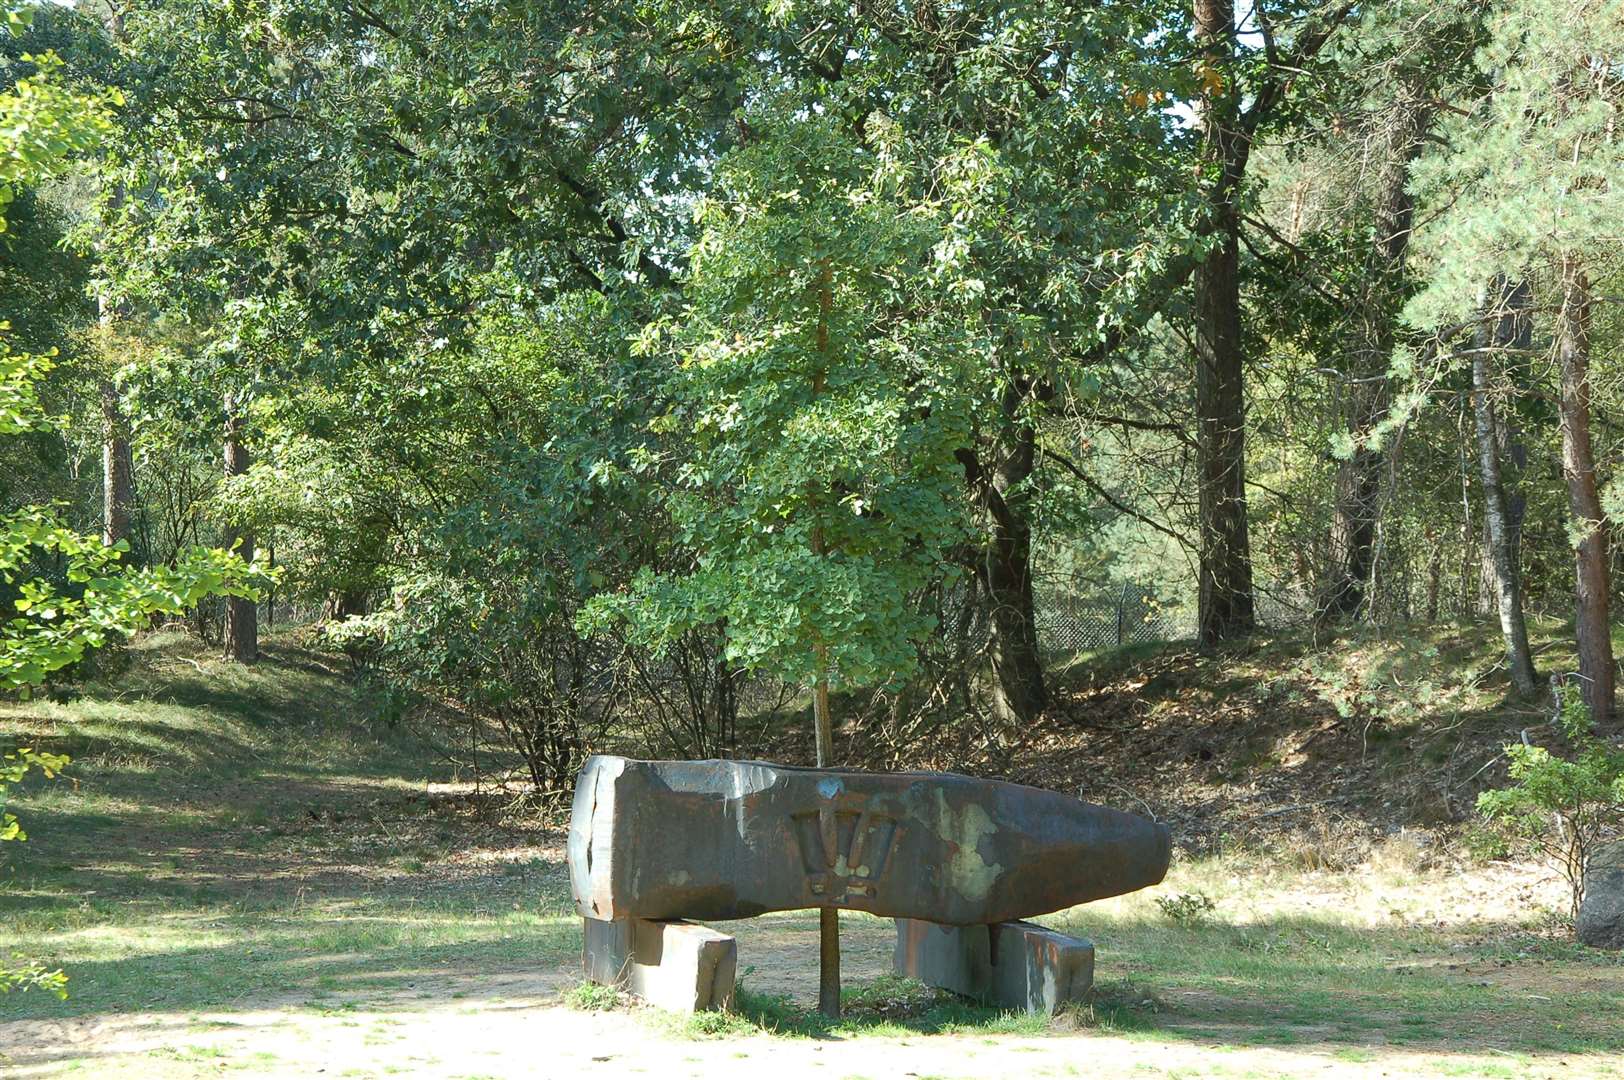 One of the many art works, a Ginko tree grows up through the hammer head sculpture - eventually it will form the shaft of the hammer.